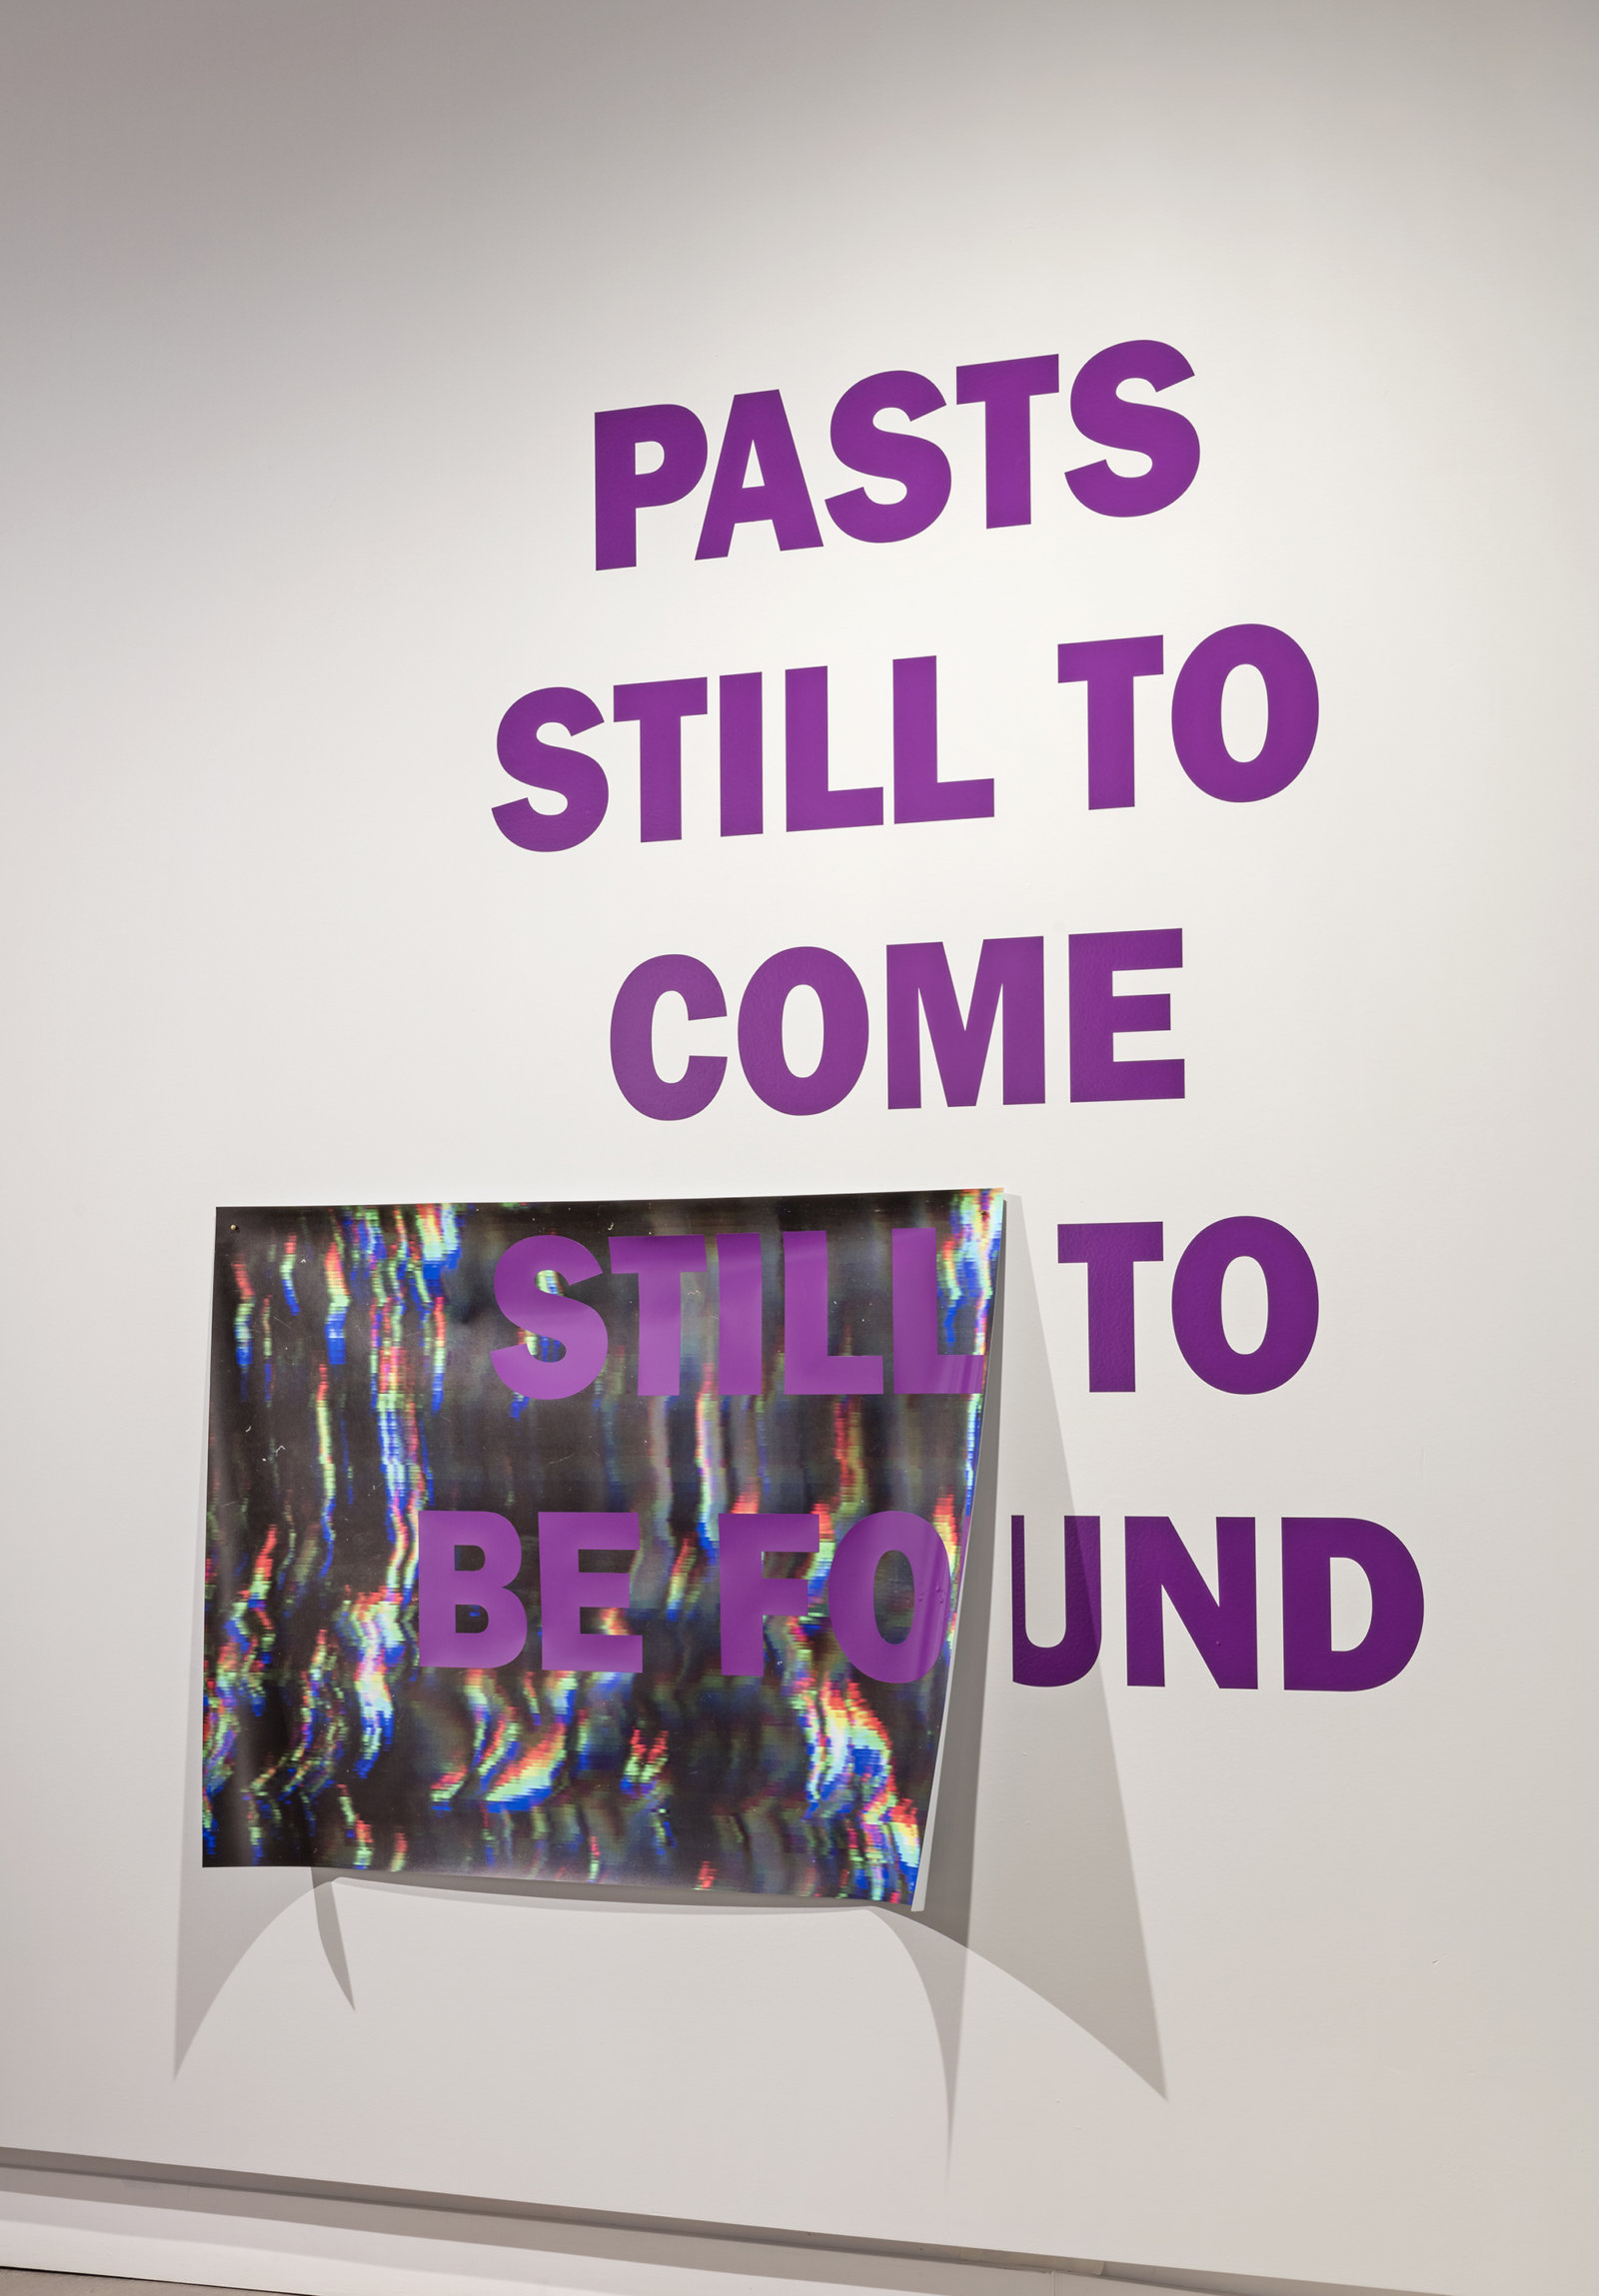 Raymond Boisjoly, Pasts still to come still to be found, 2016, vinyl lettering on solvent based inkjet print on vinyl, 65 x 57 in. (164 x 146 cm). Installation view, Over a Distance Between One and Many, Koffler Gallery, Toronto, ON, 2016